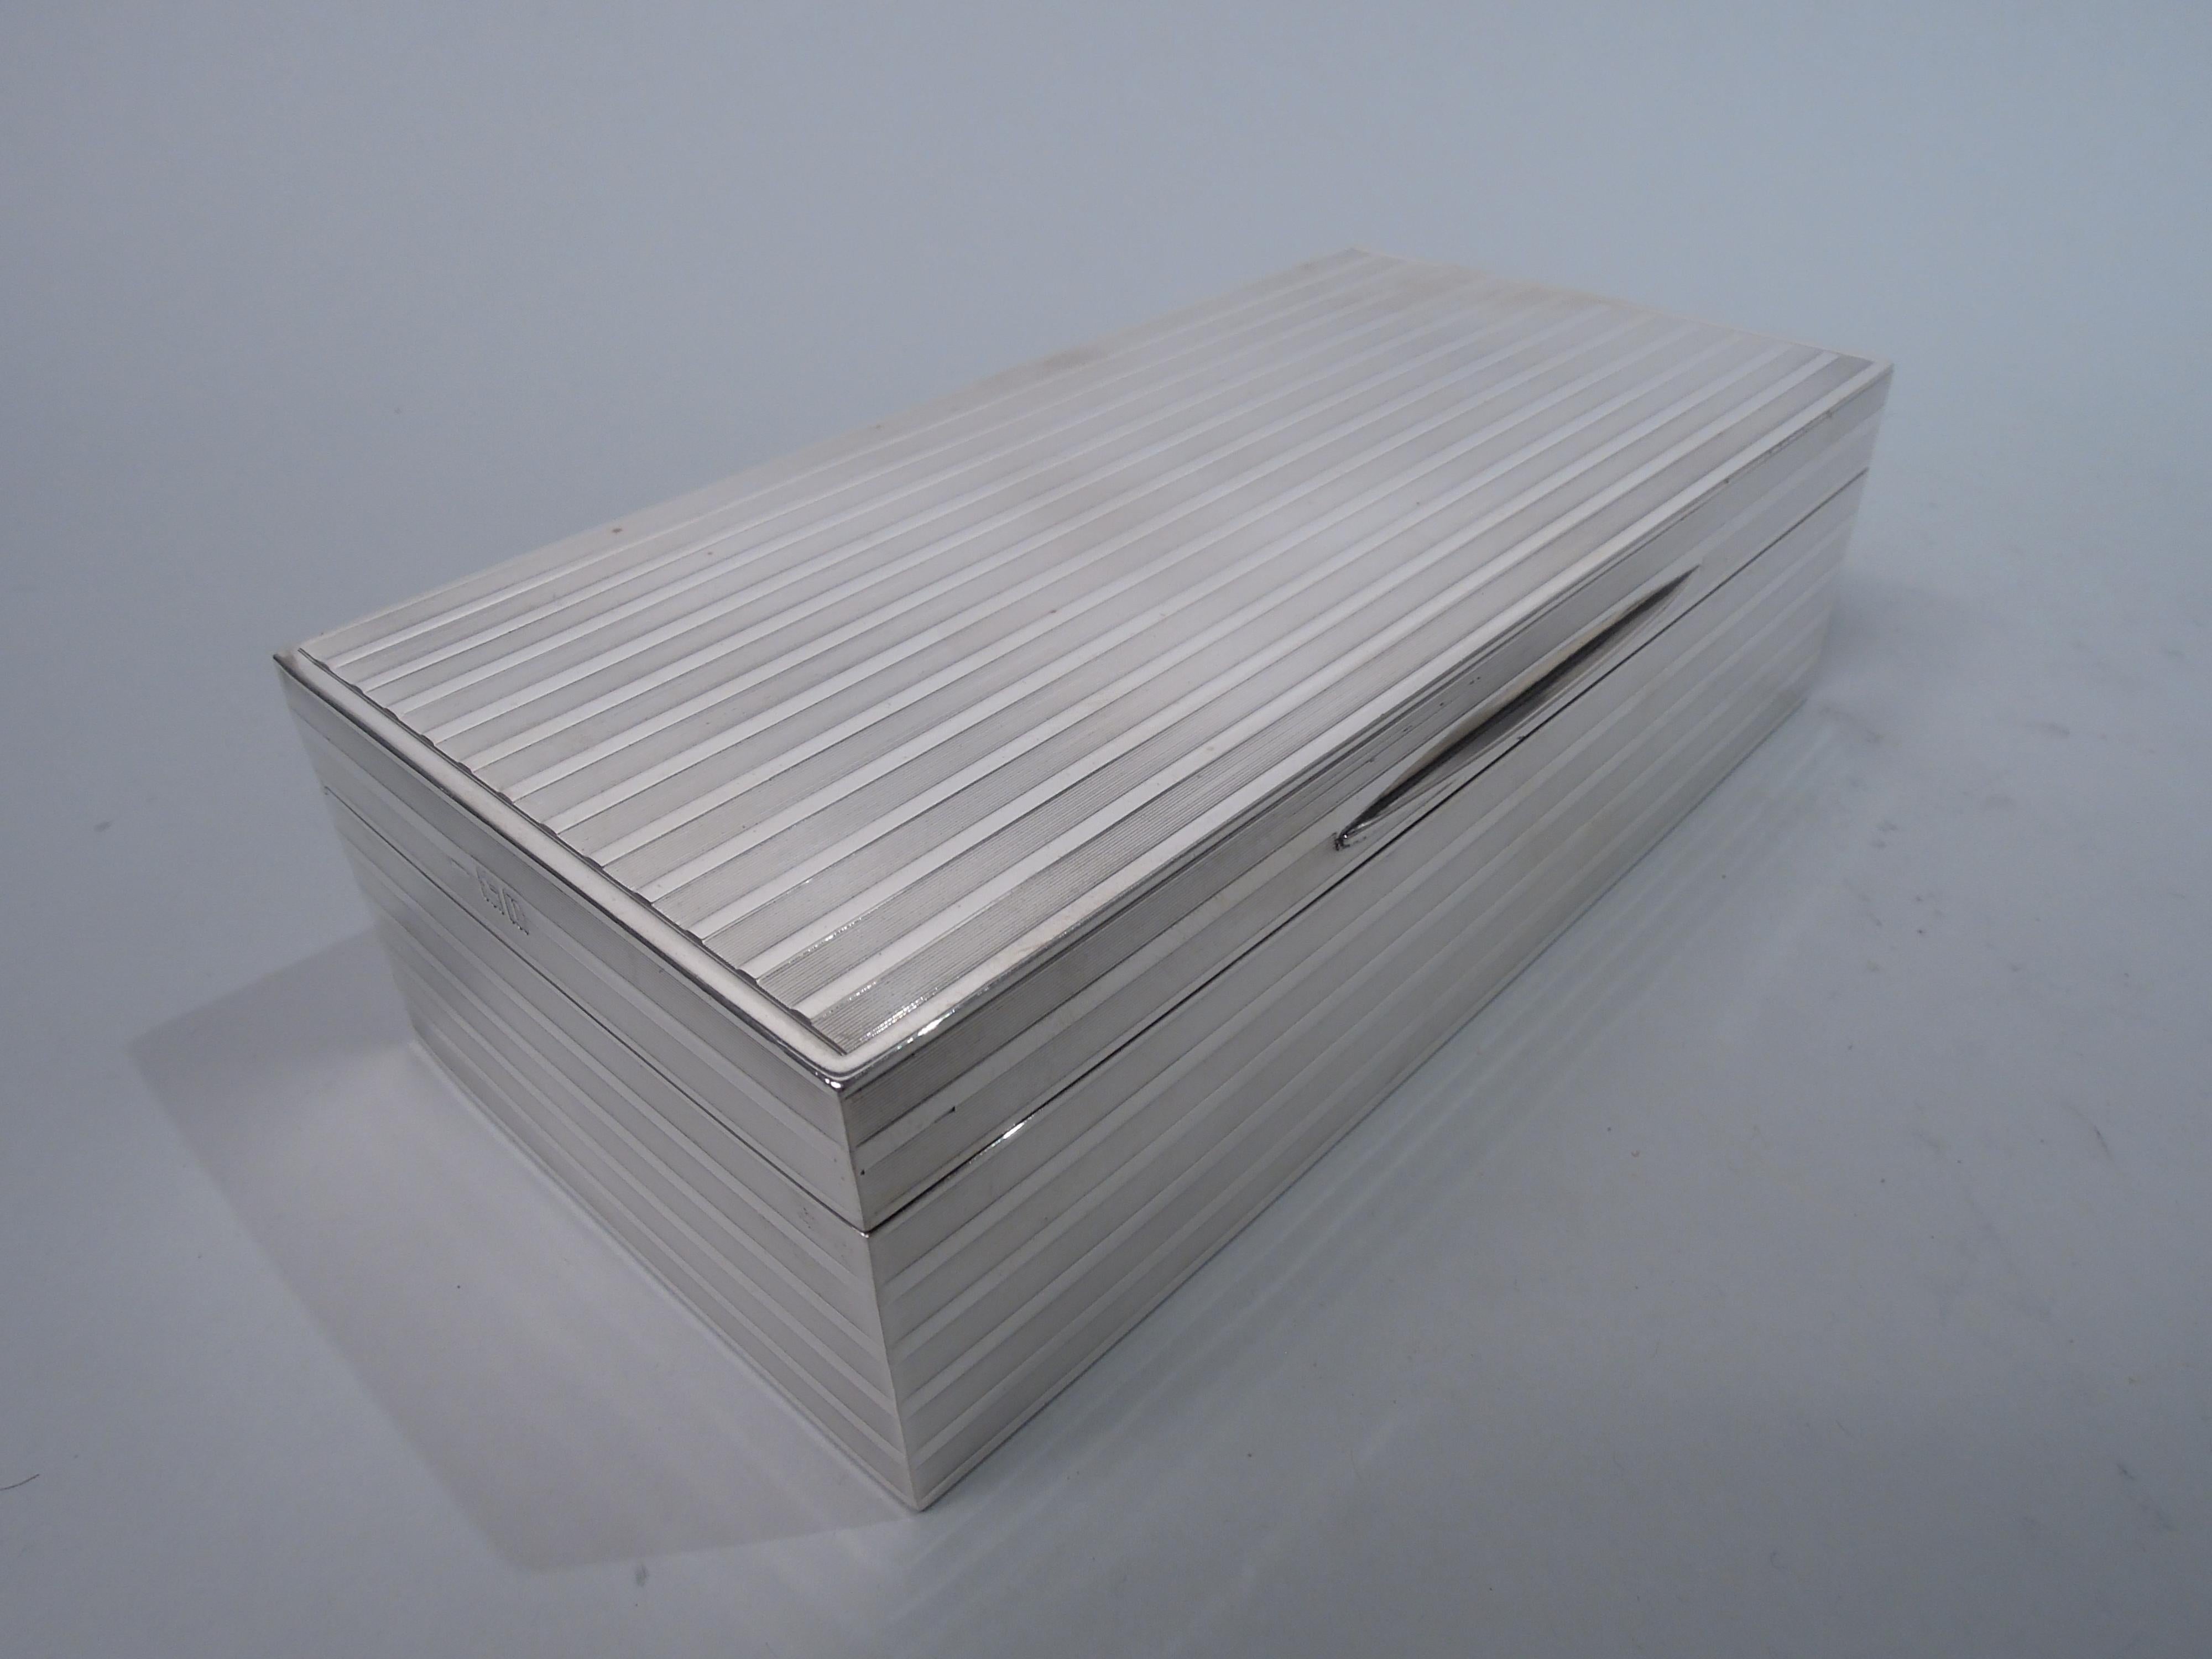 English Modern sterling silver box, 1912. Rectangular with straight sides. Cover hinged with flat top and tapering tab. Engine-turned horizontal stripes alternating with plain ones on sides and cover top. Box interior cedar-lined and partitioned and